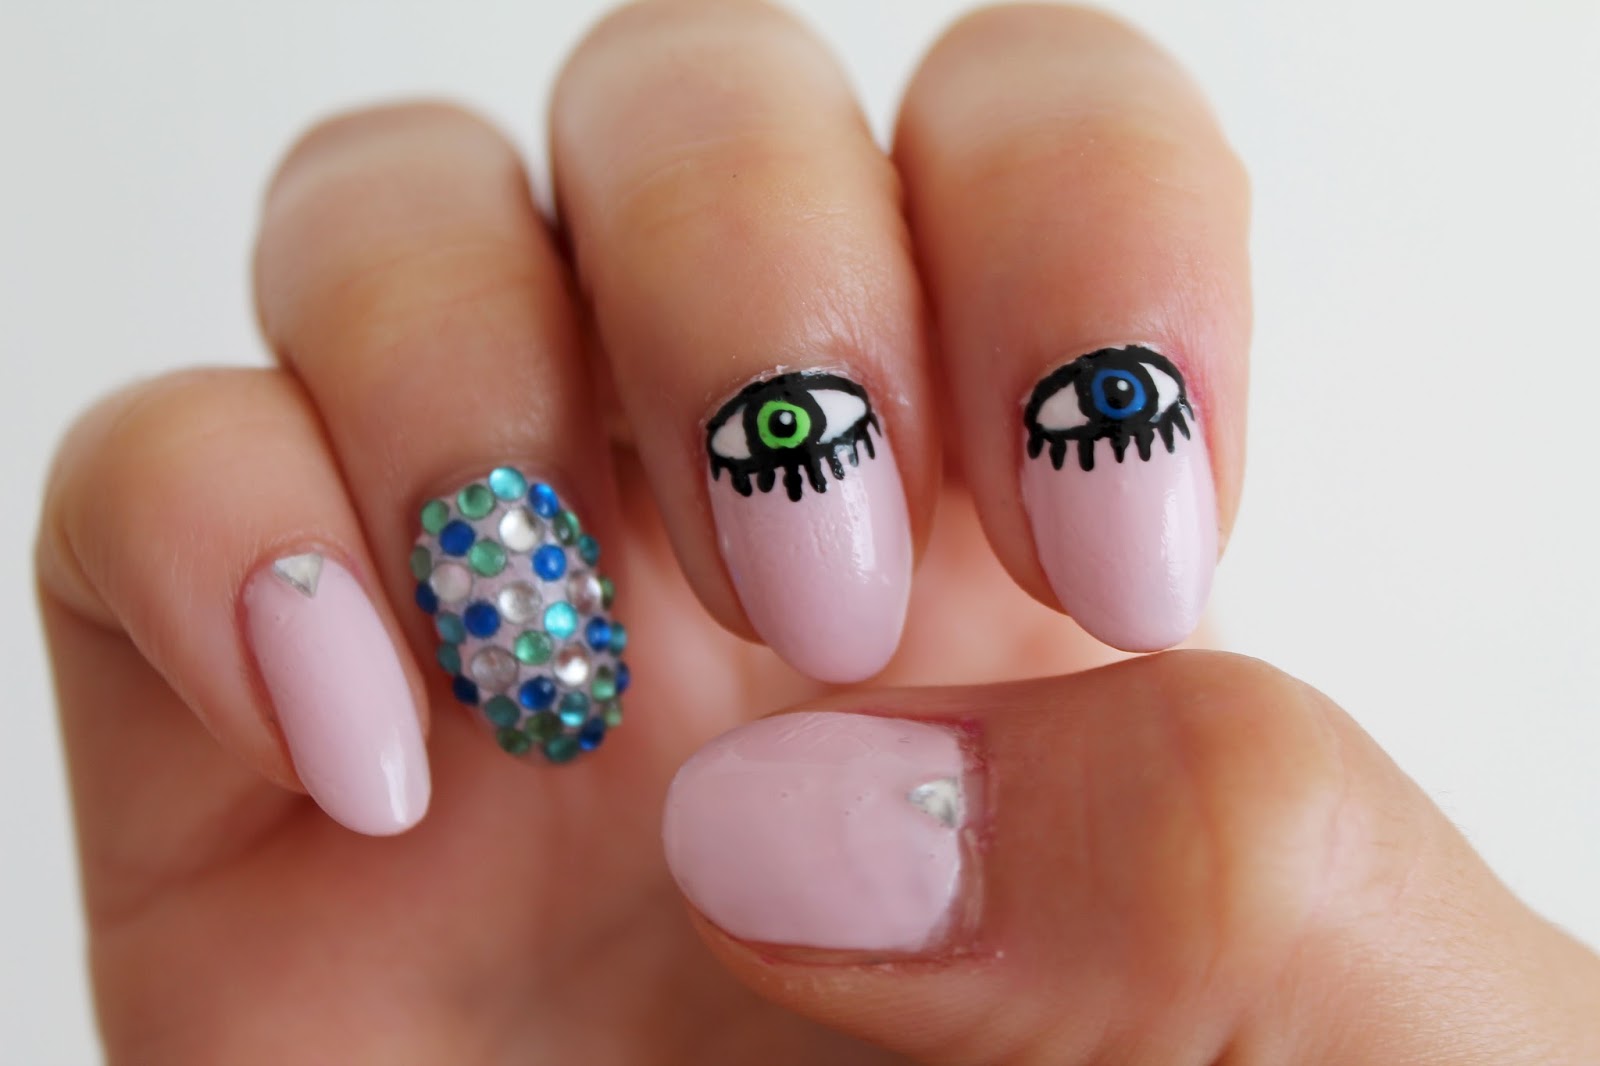 1. "Evil Eye Nail Art Designs for Protection and Style" - wide 2